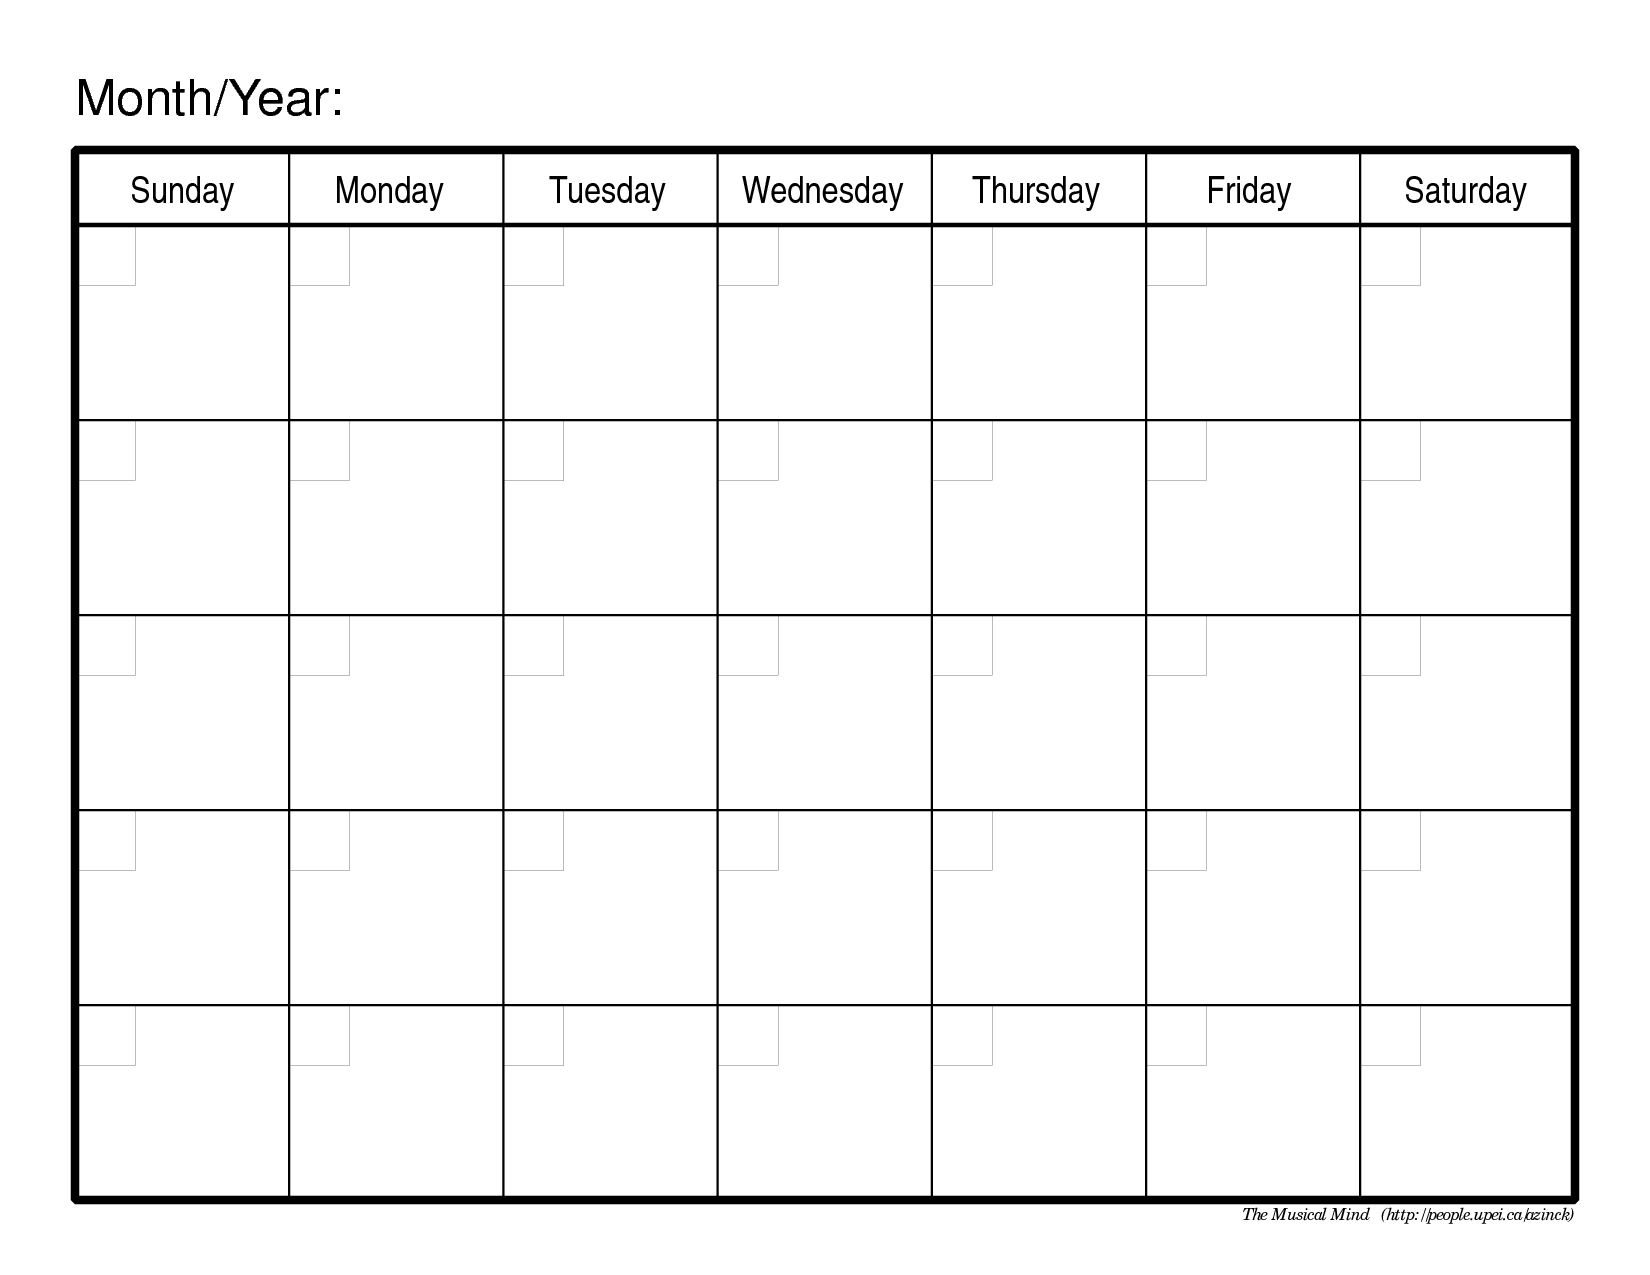 Monthly Calendar Template | Blank Calendar Pages, Printable